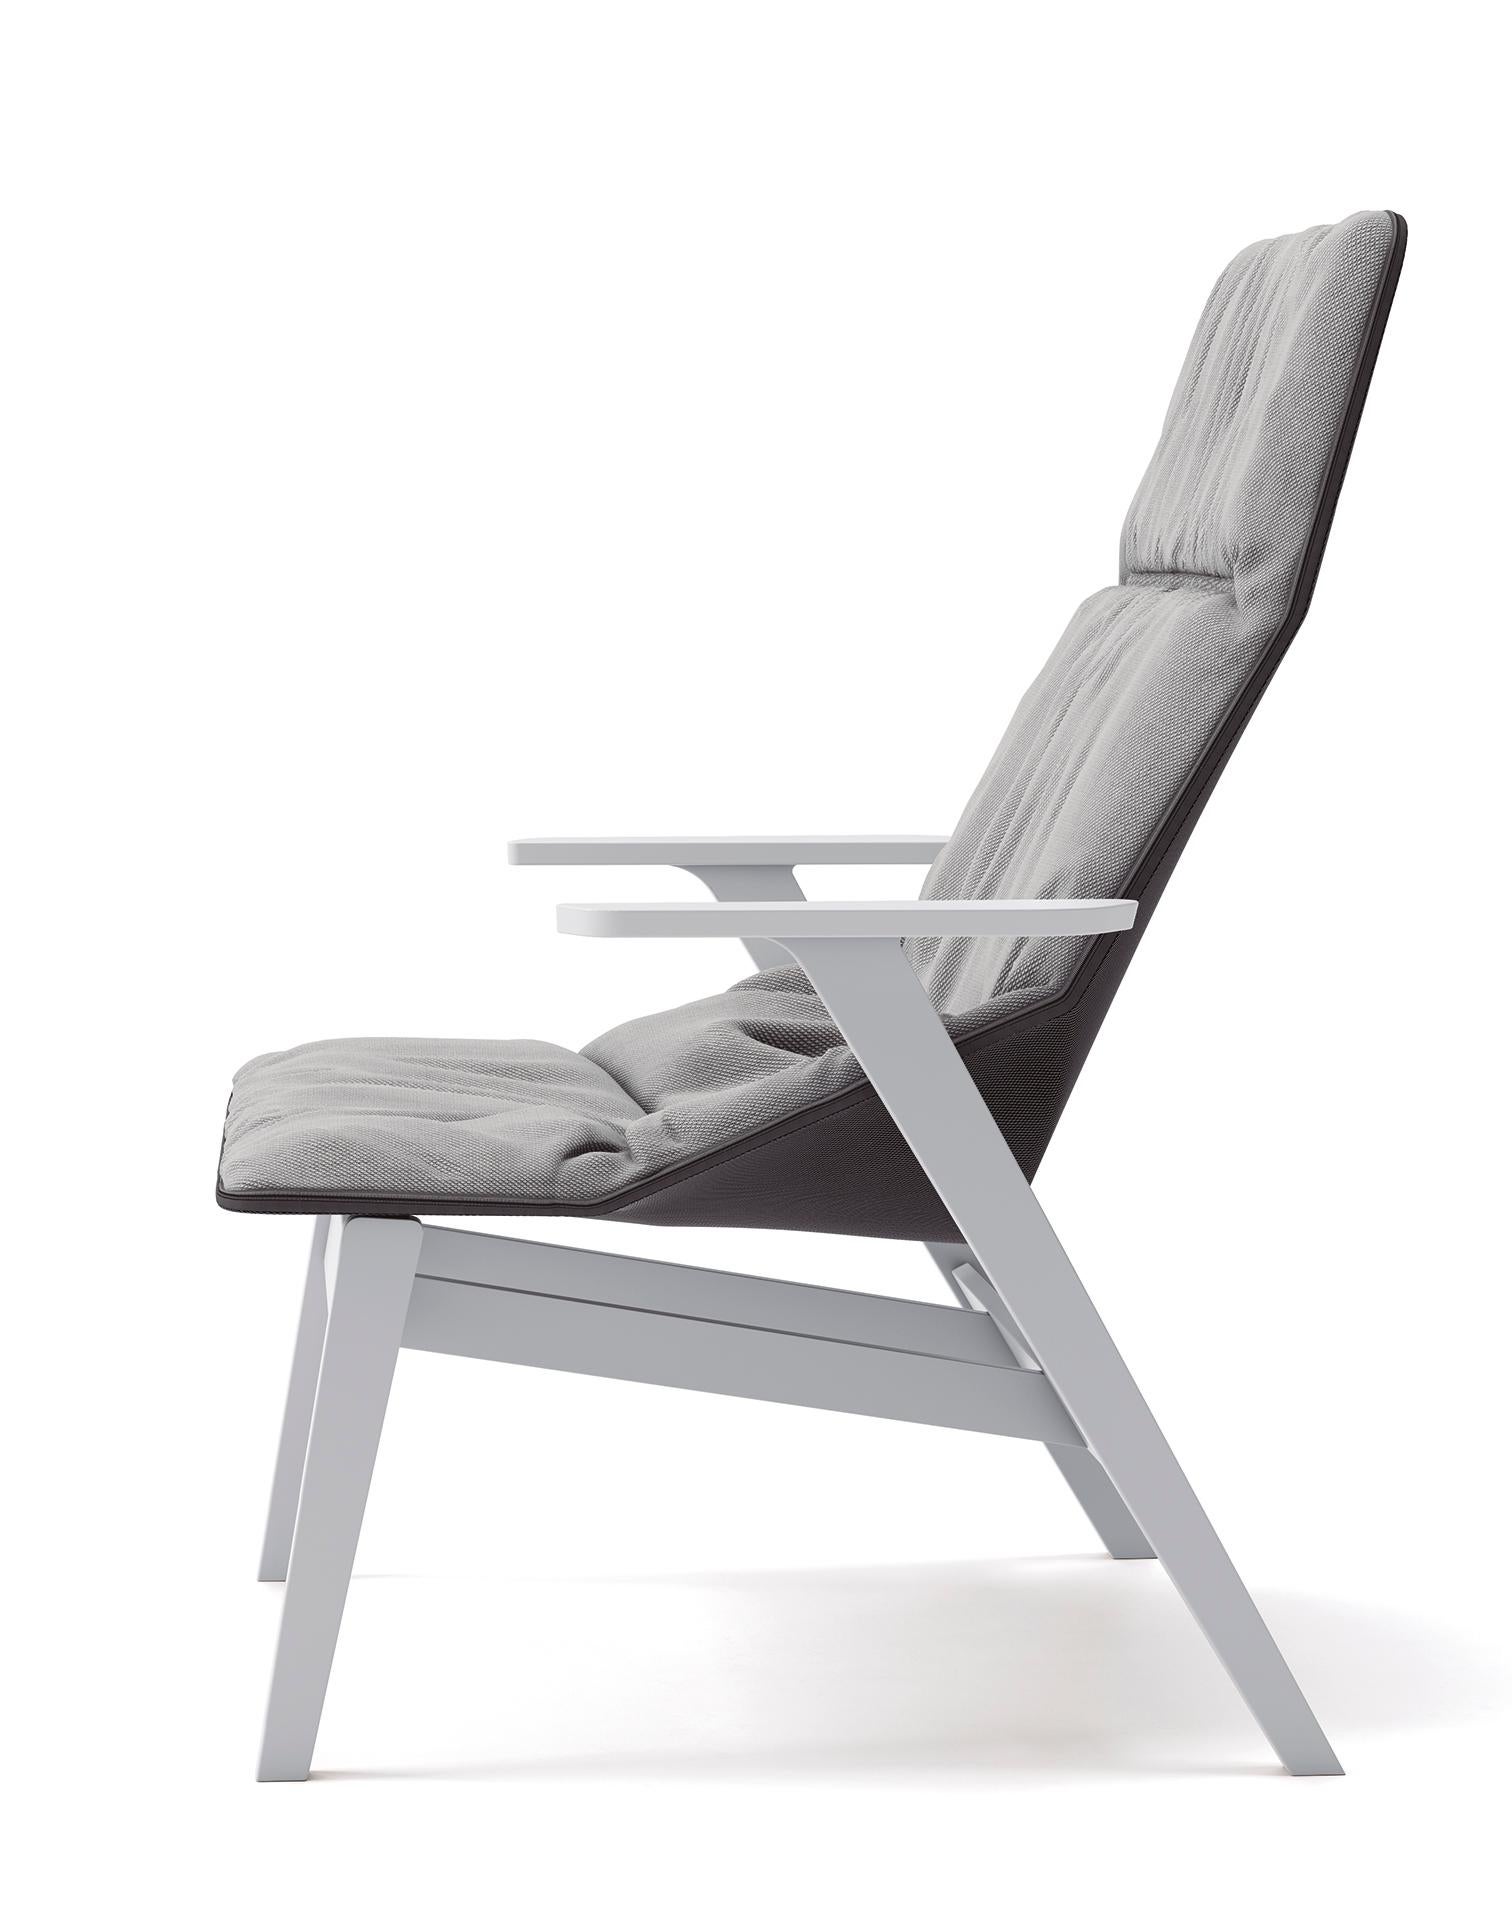 Jean-Marie Massaud, Ace Lounge Chair with Arms, Viccarbe, 2009 For Sale 2